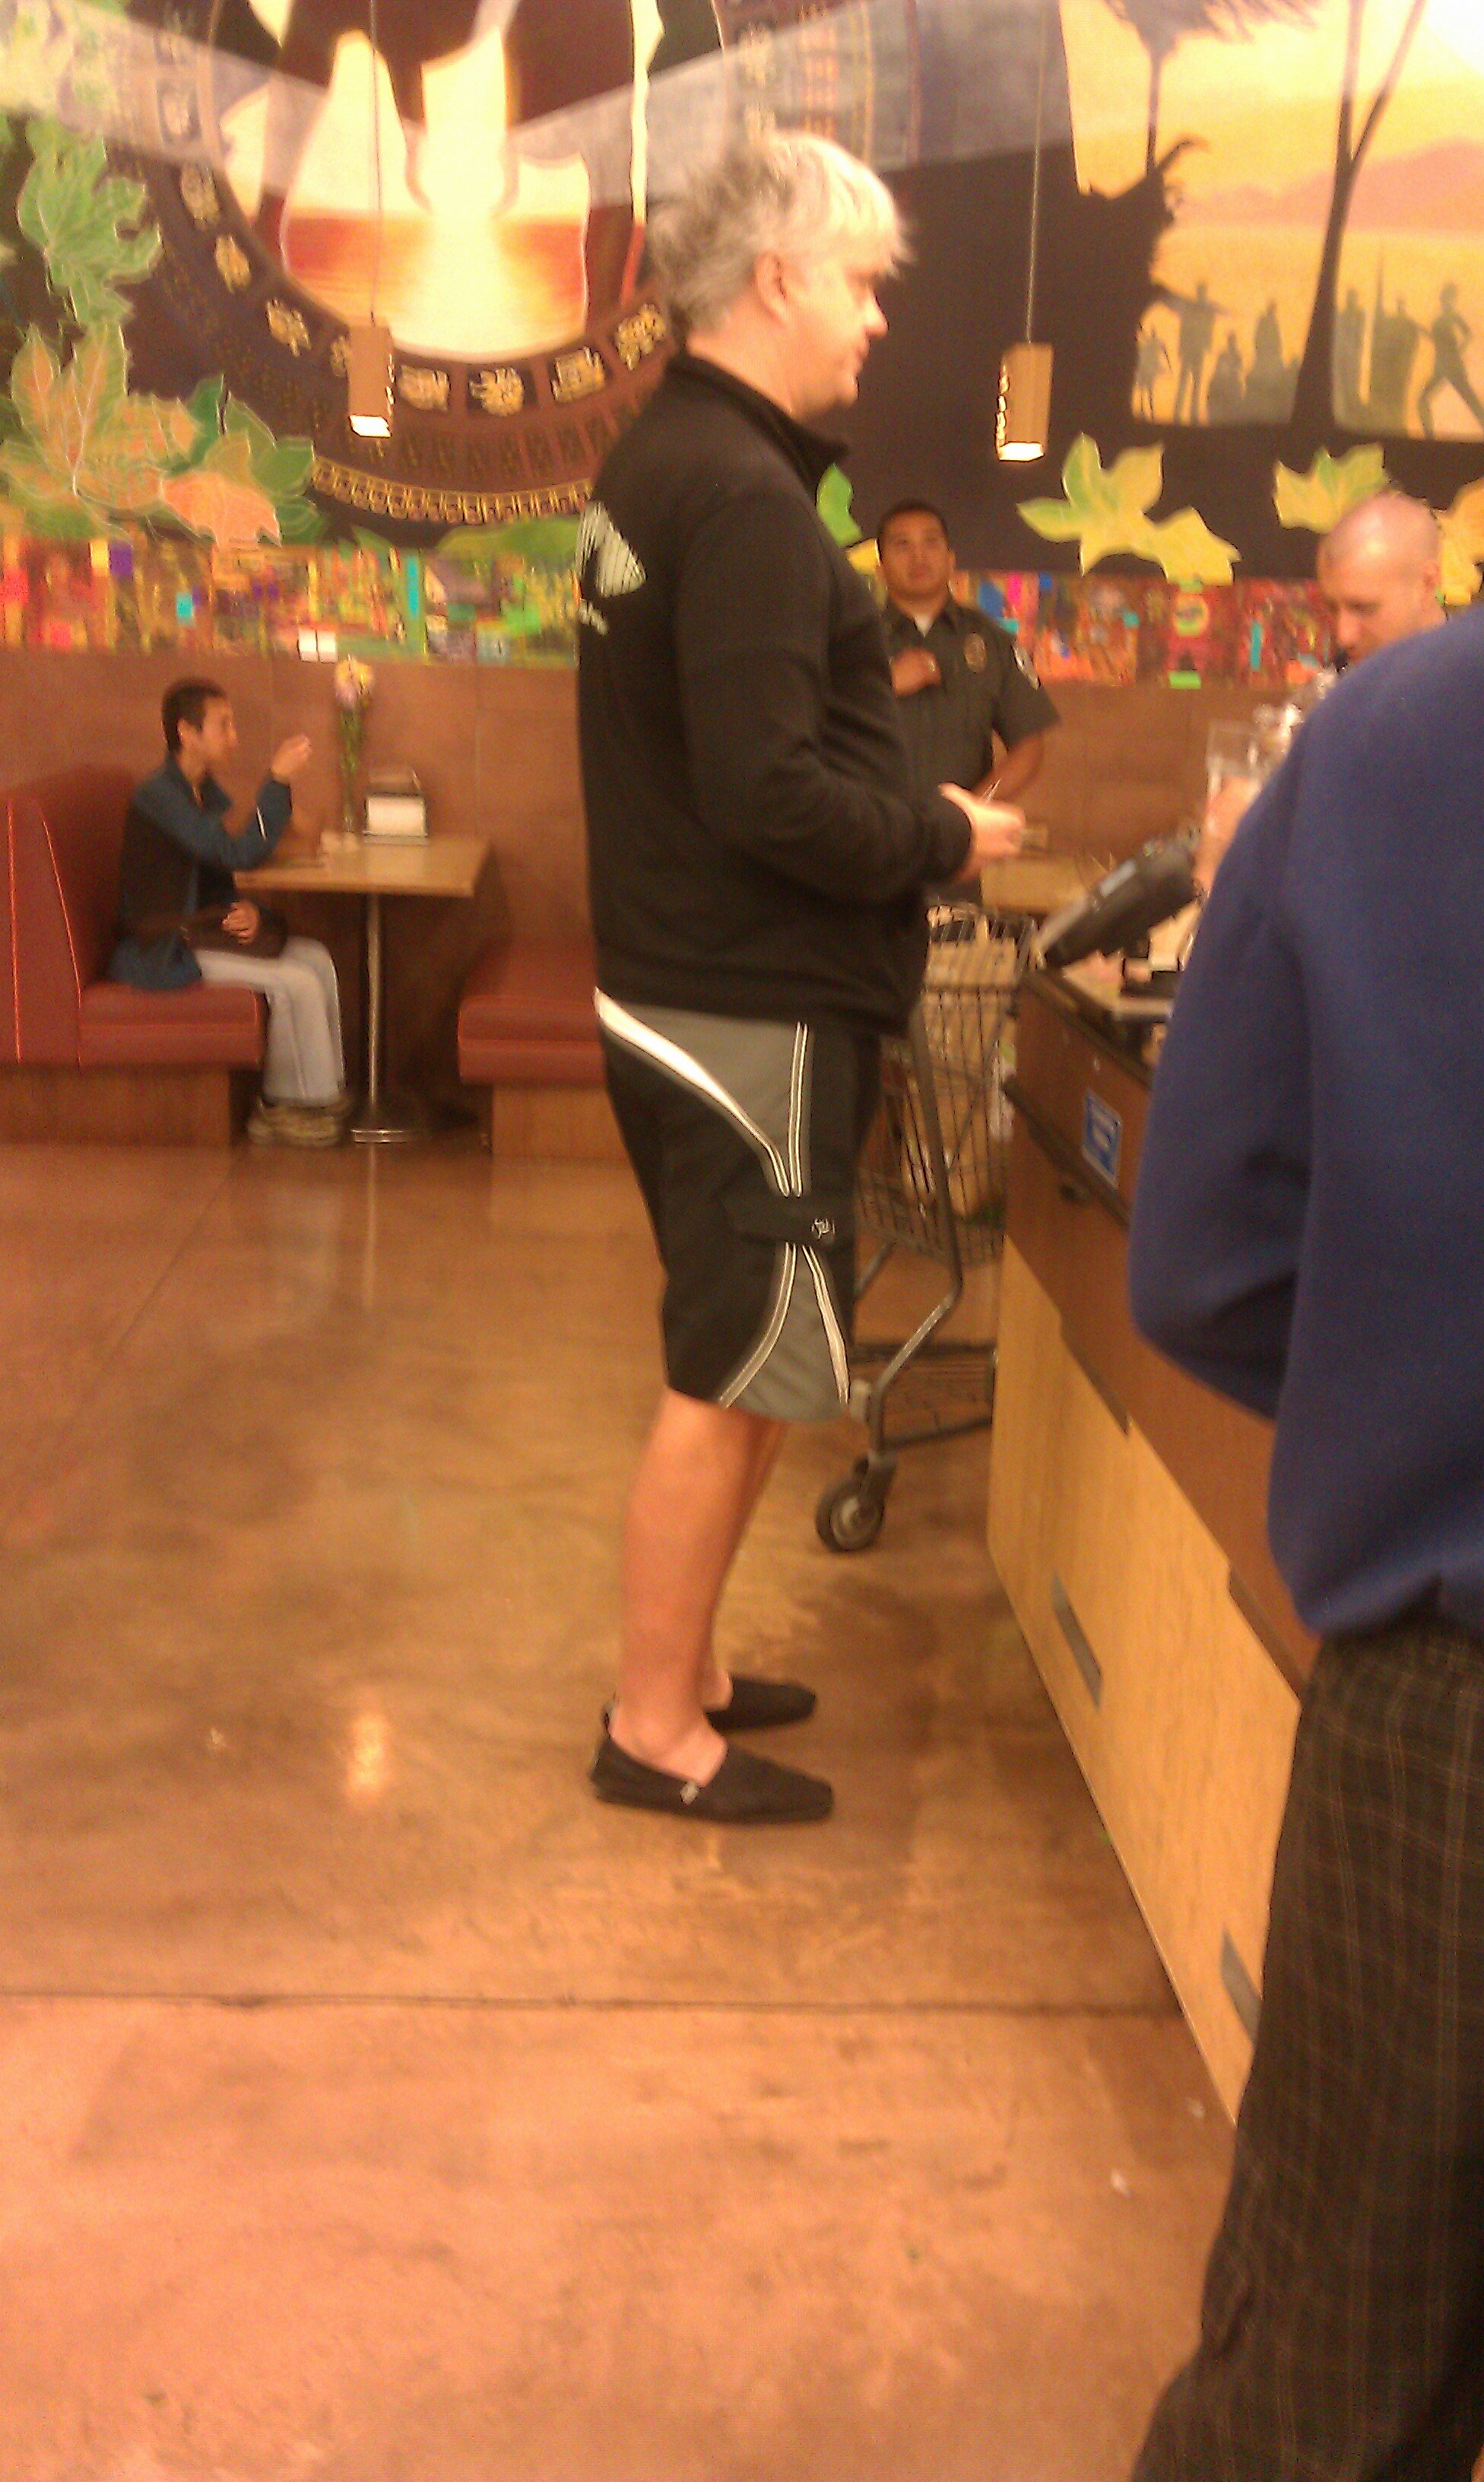  This was at the Whole Foods on Lincoln and Rose in Venice. He looked pretty bad. 